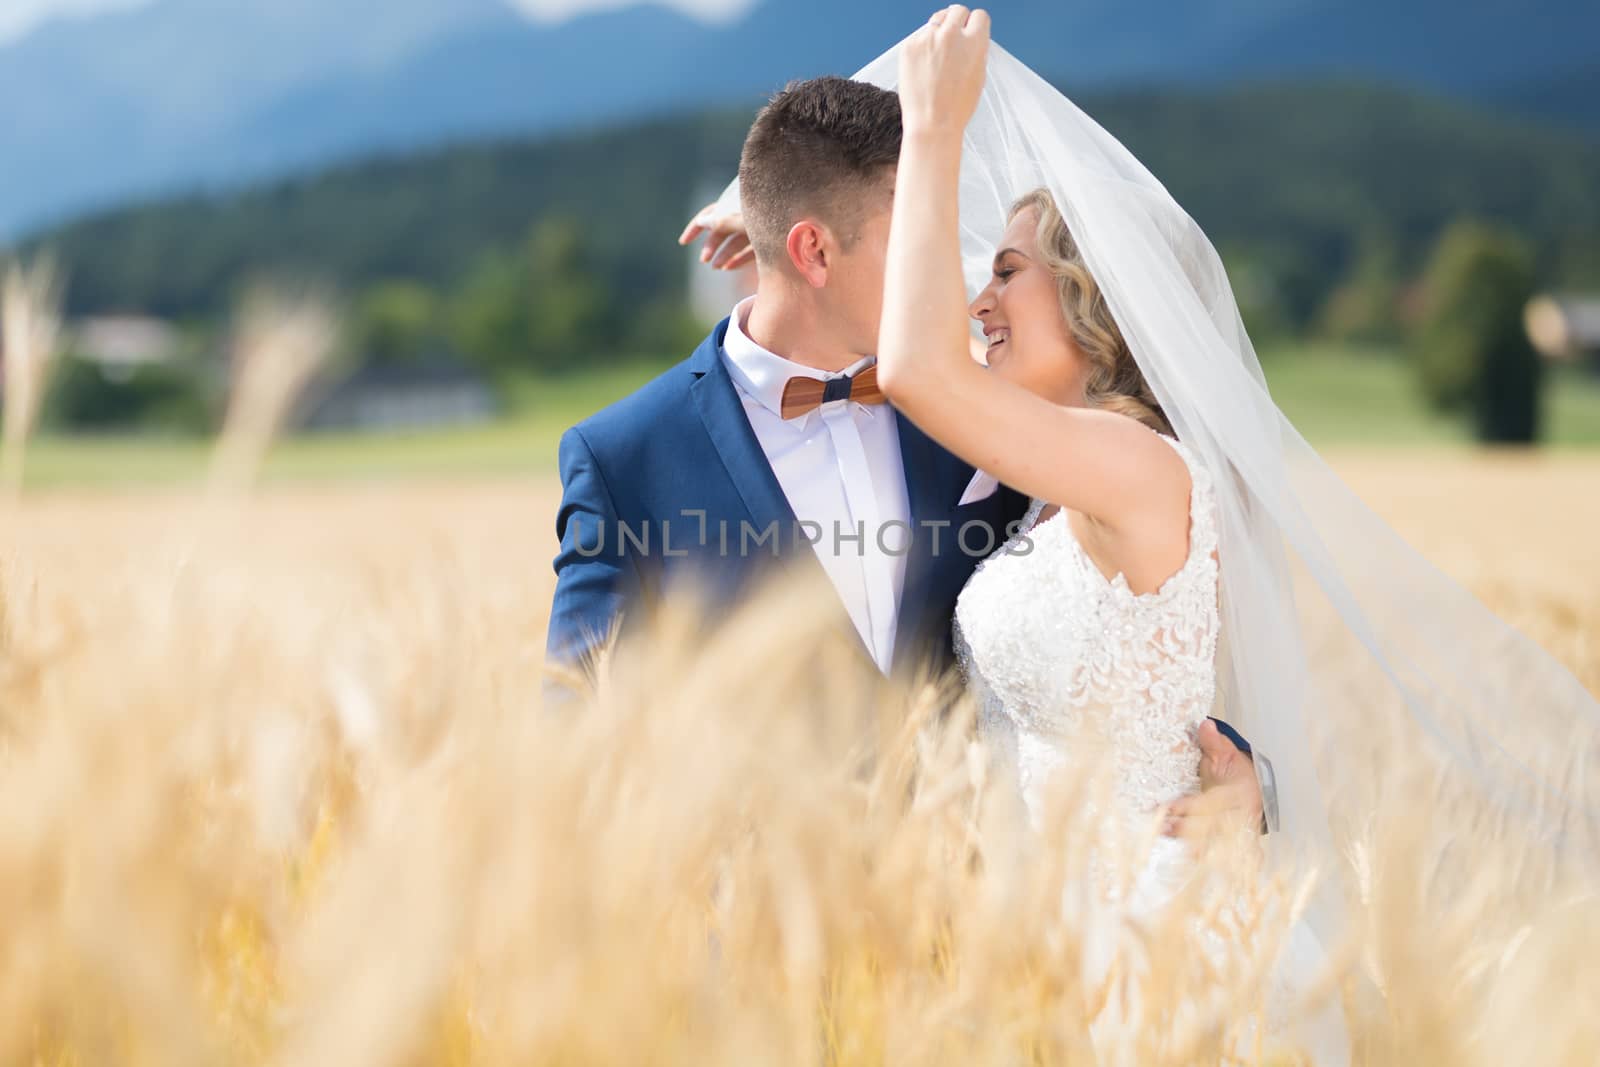 Groom hugs bride tenderly while wind blows her veil in wheat field somewhere in Slovenian countryside. by kasto